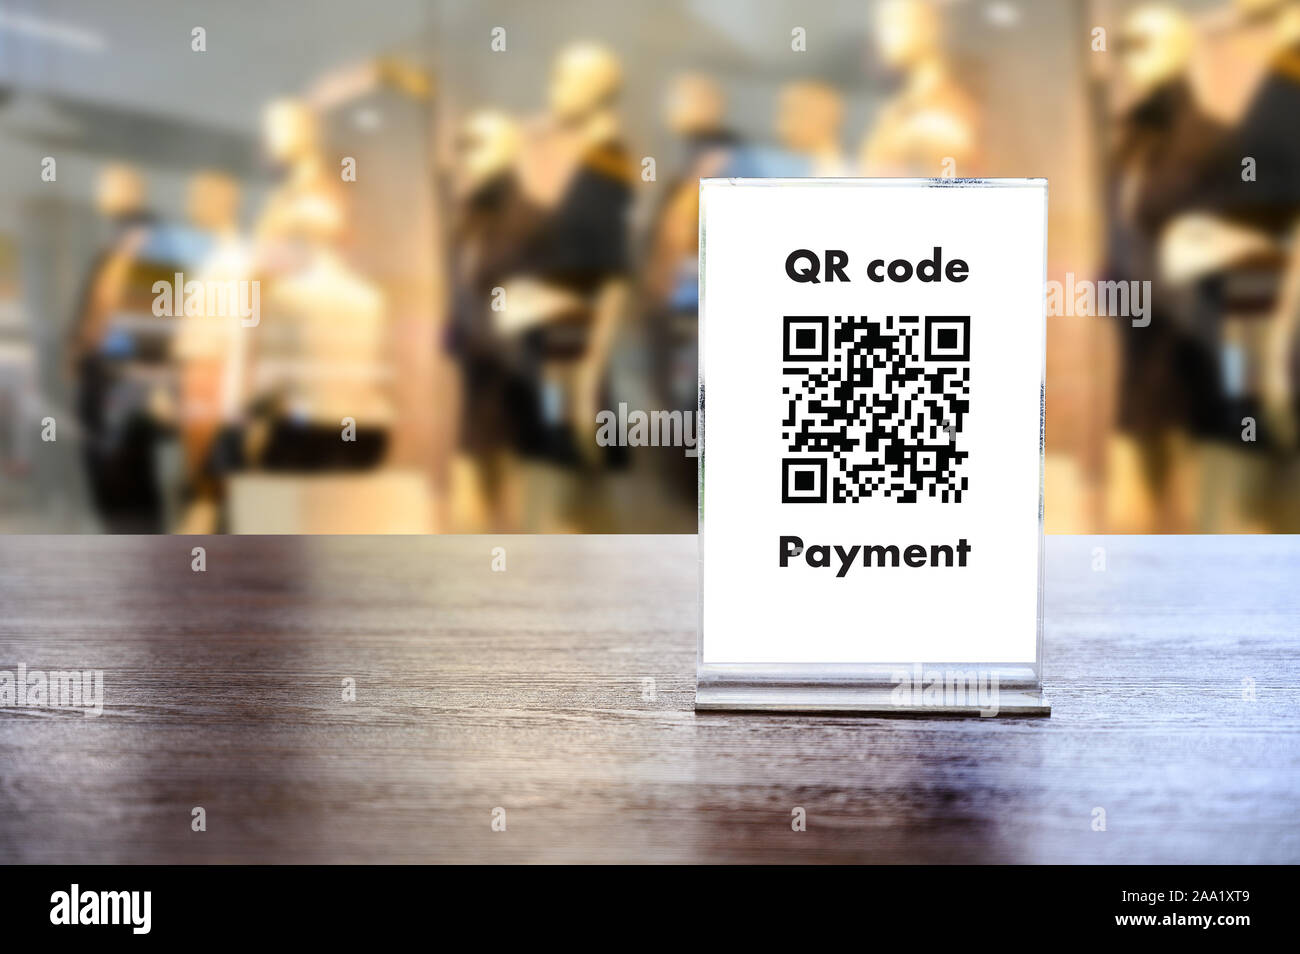 Download Payment Qr Code For Moblie Qr Code Payment E Wallet Digital Pay Without Money Cashless Technology To Pay Stock Photo Alamy